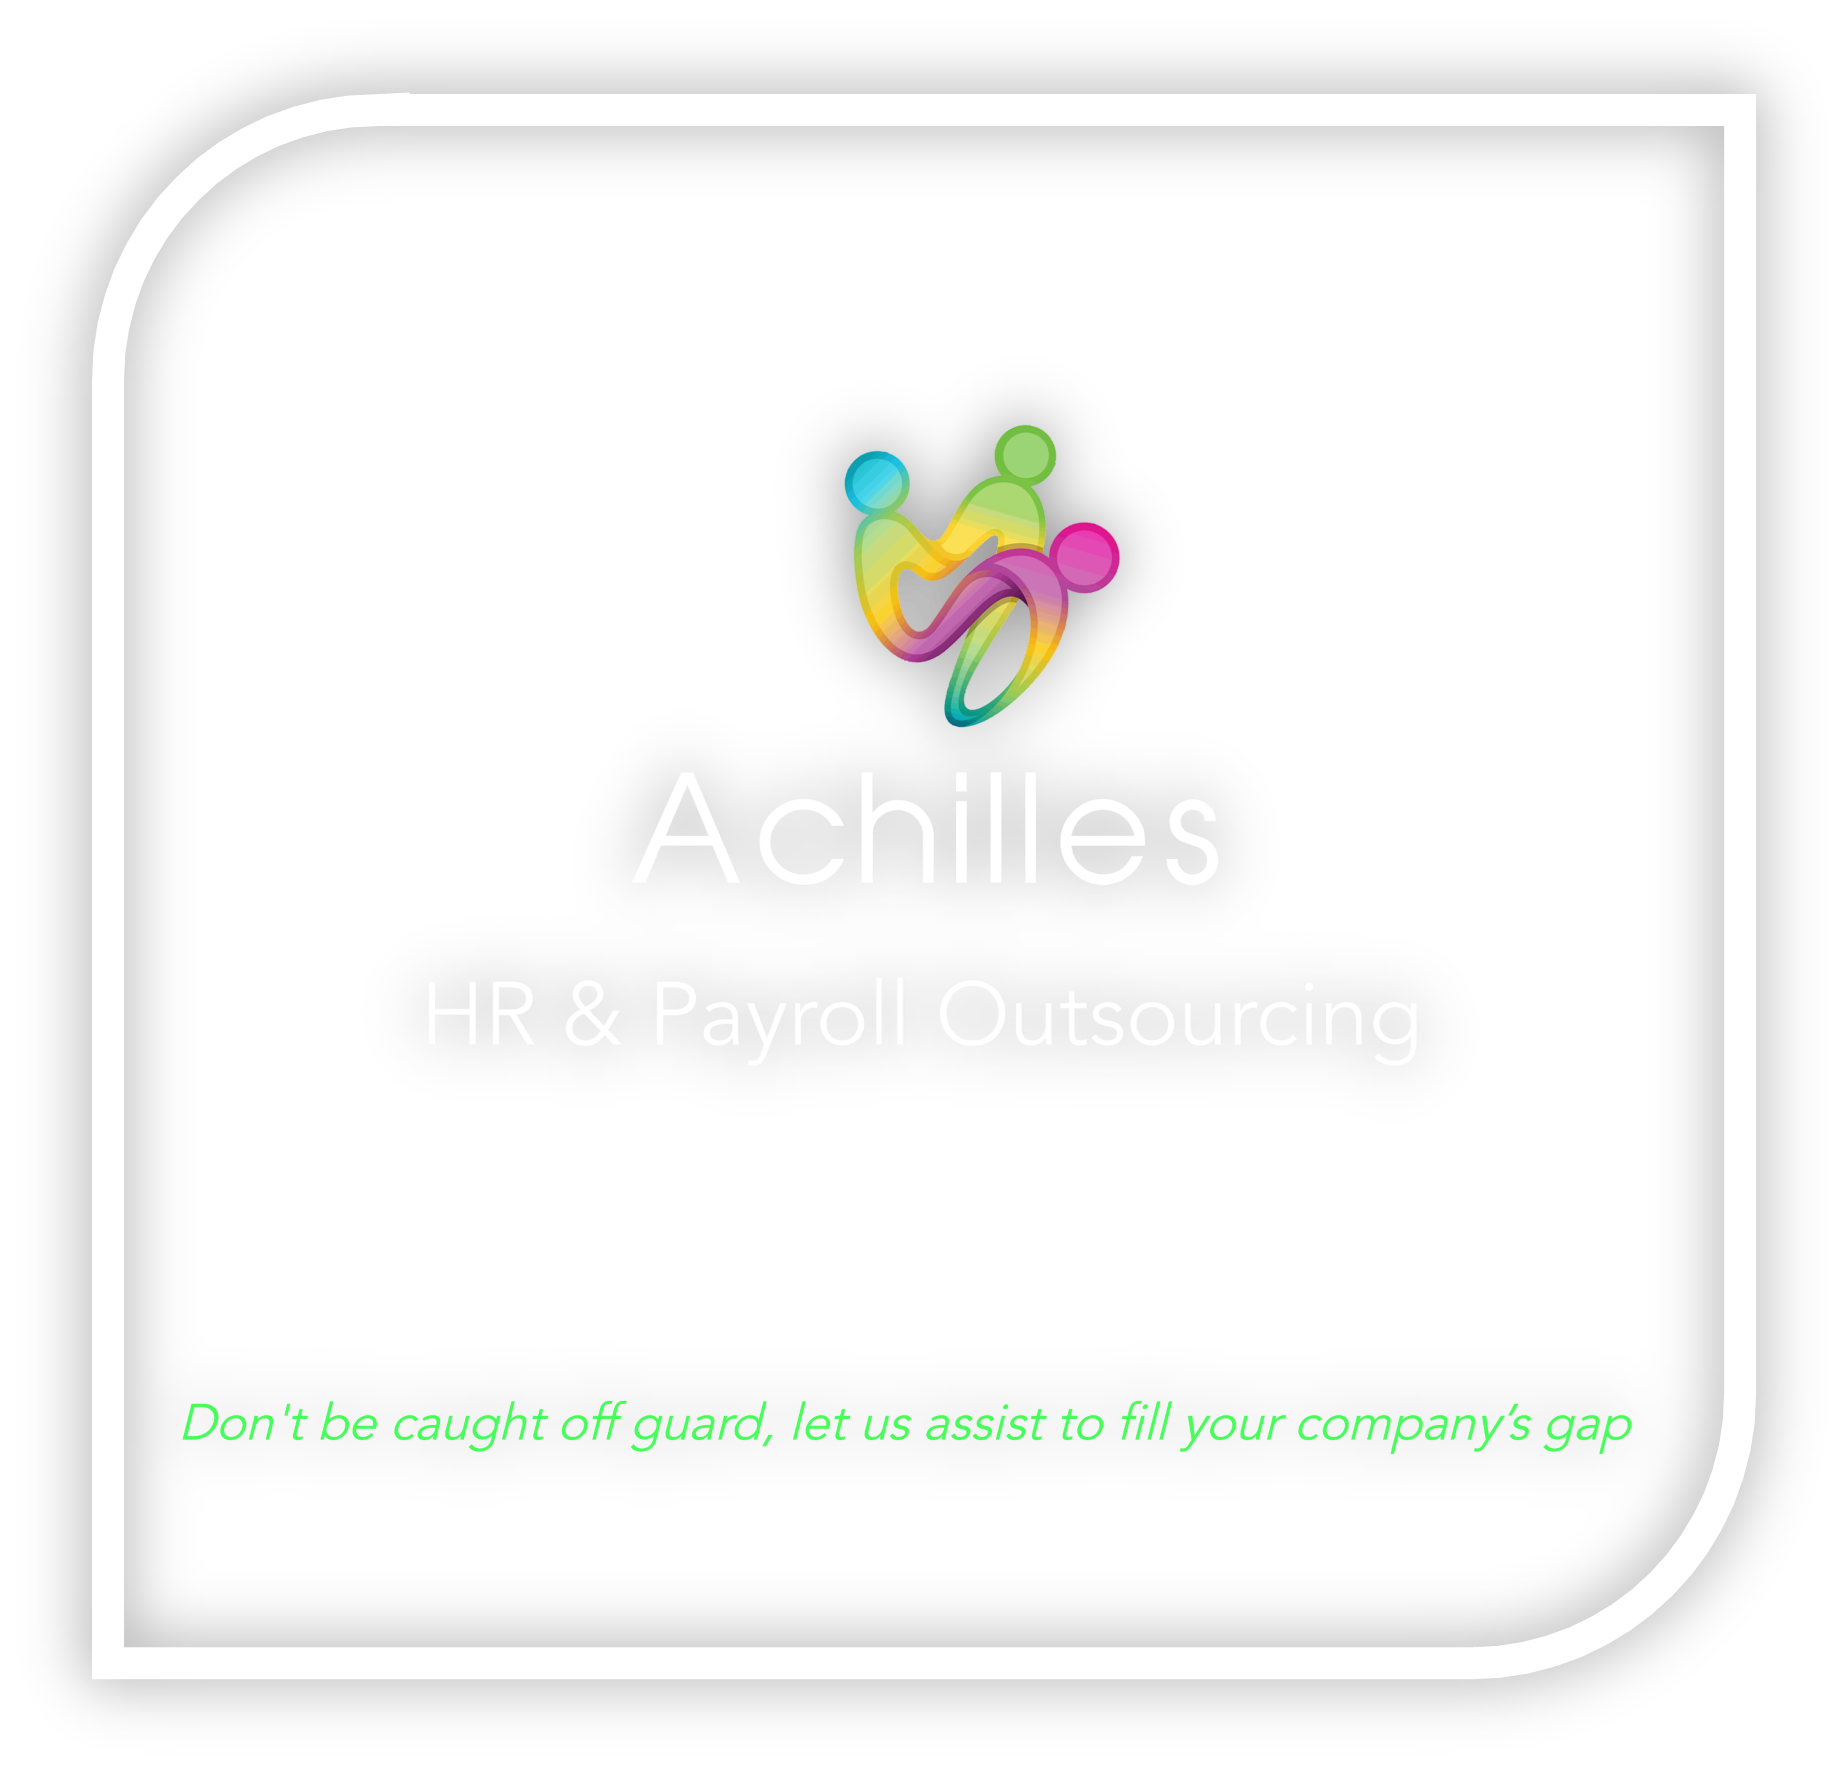 Achilles HR & Payroll Outsourcing